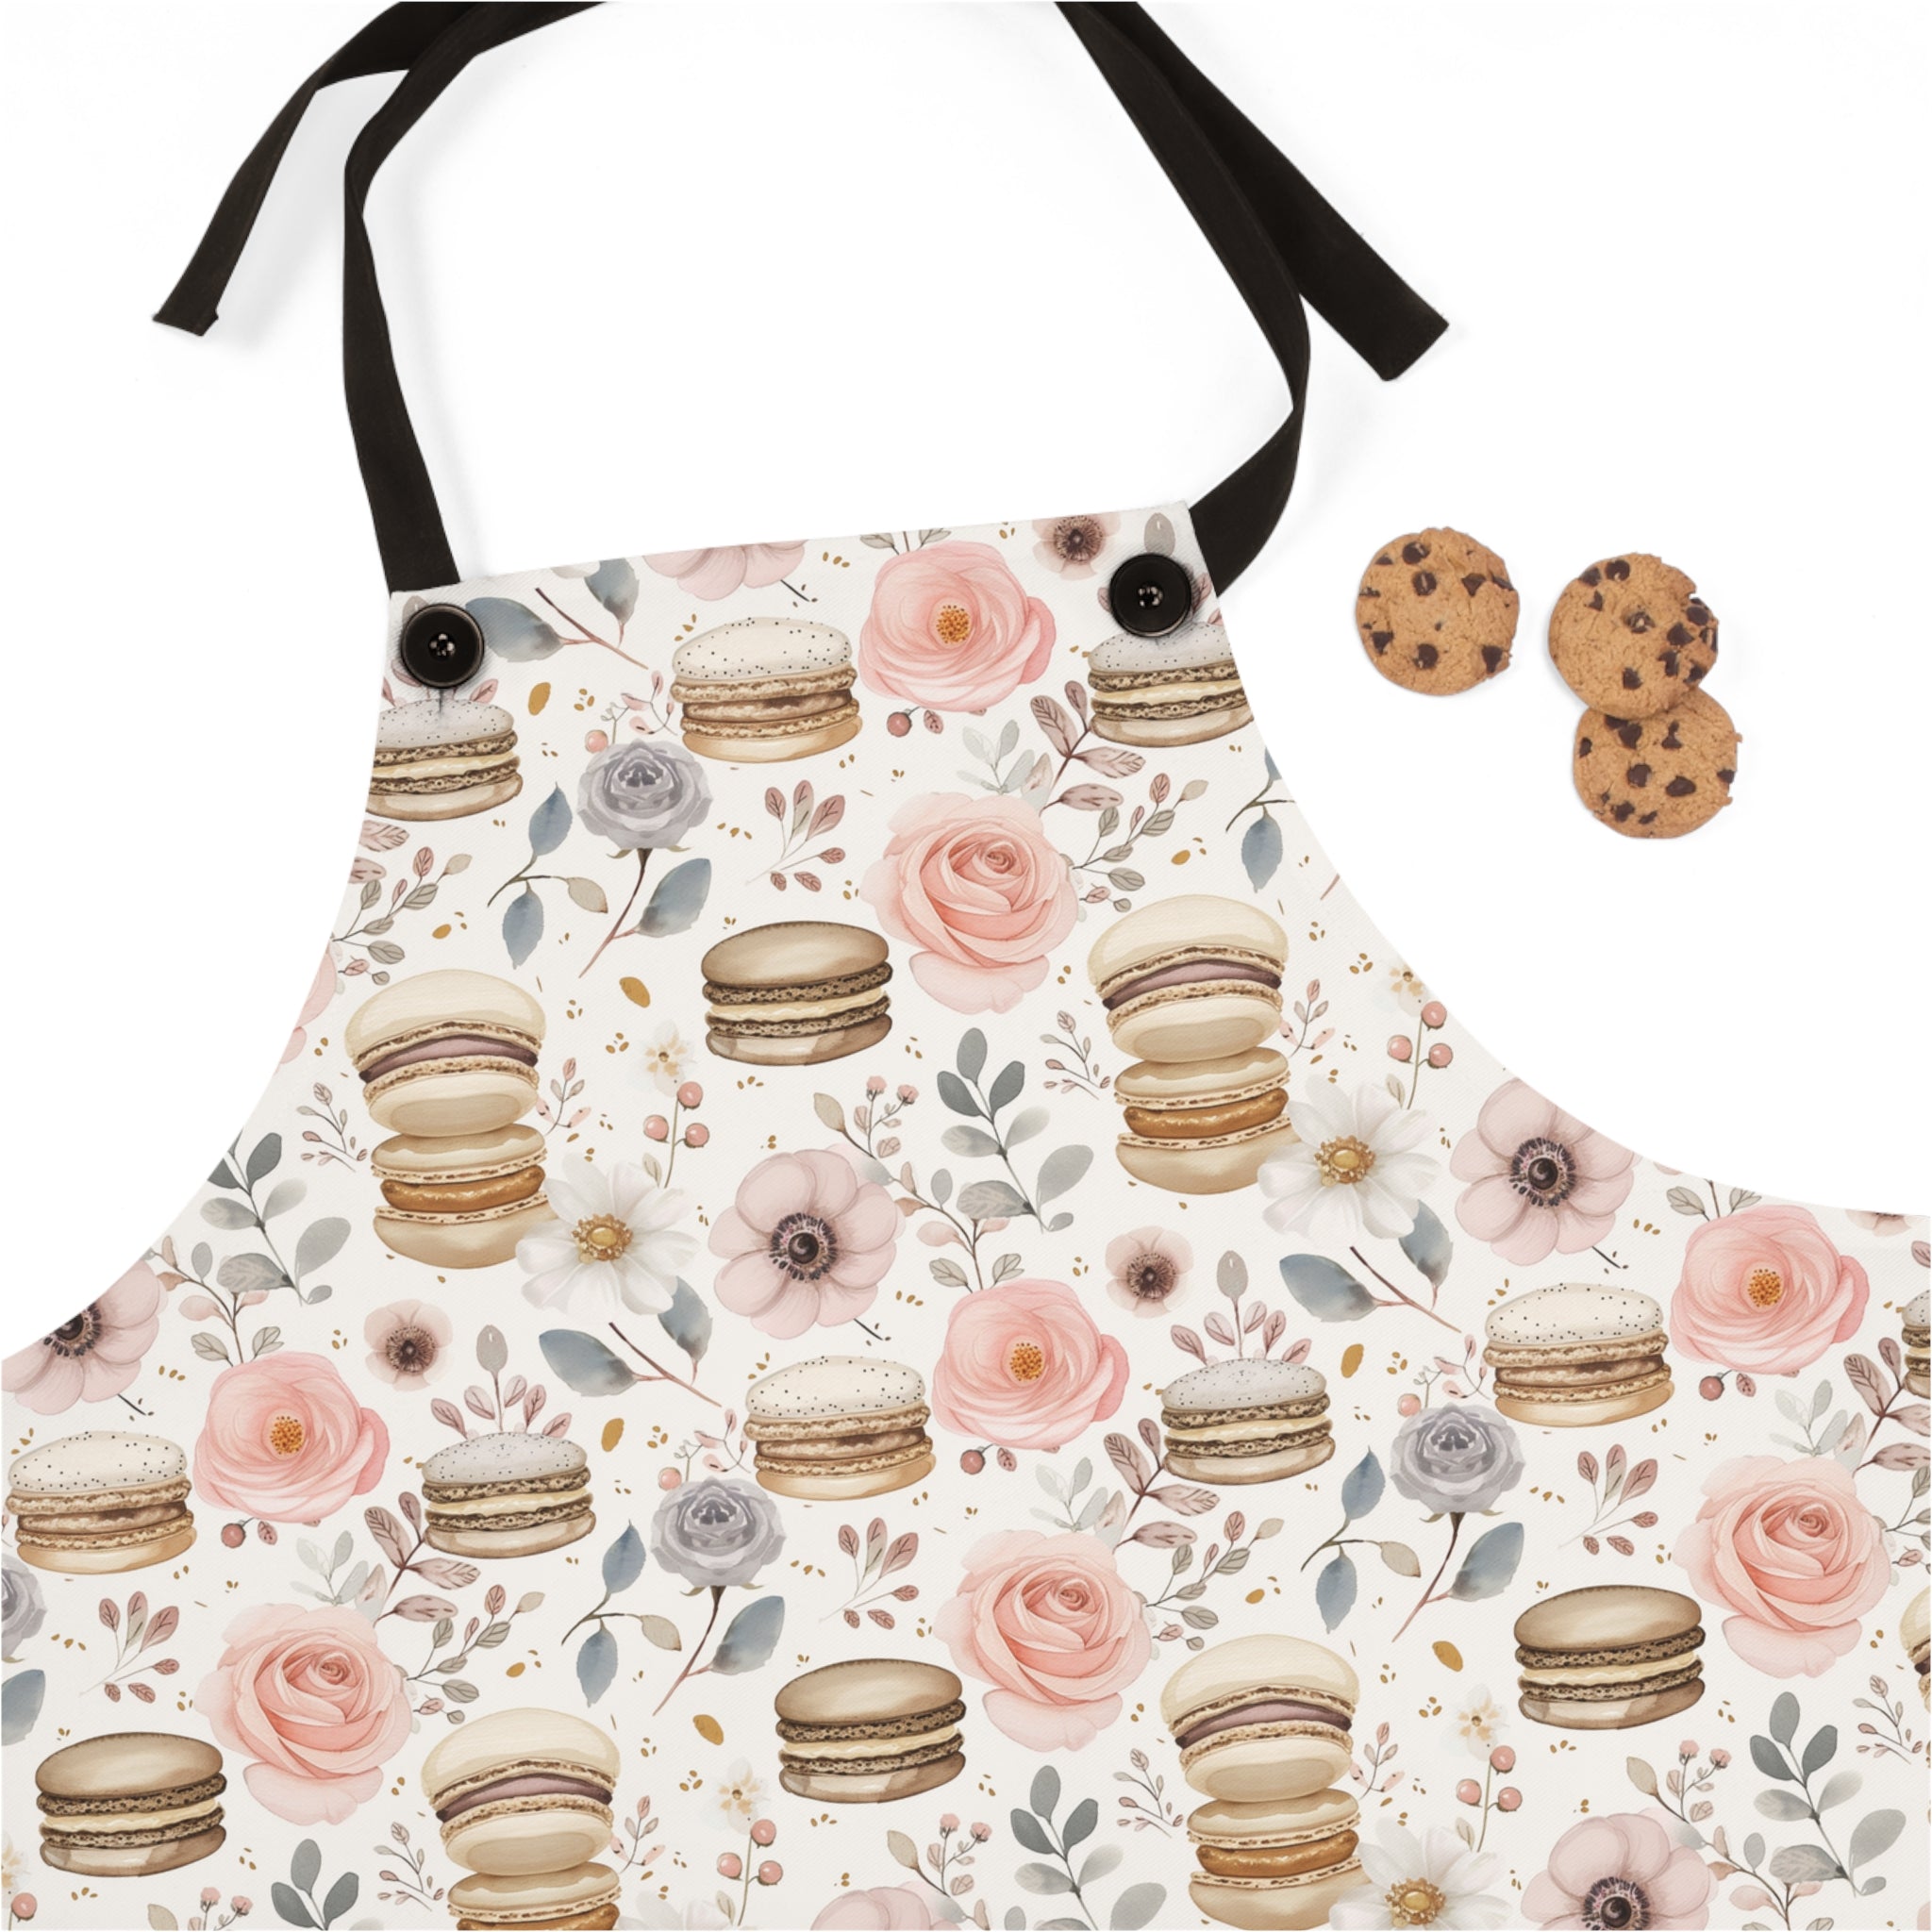 Stay Stylish While Baking: It's Raining Macaroons Pastry Chef's Dream Pattern Apron (AOP) For Foodies and The Amateur Cook Who Loves a Good Laugh in Style